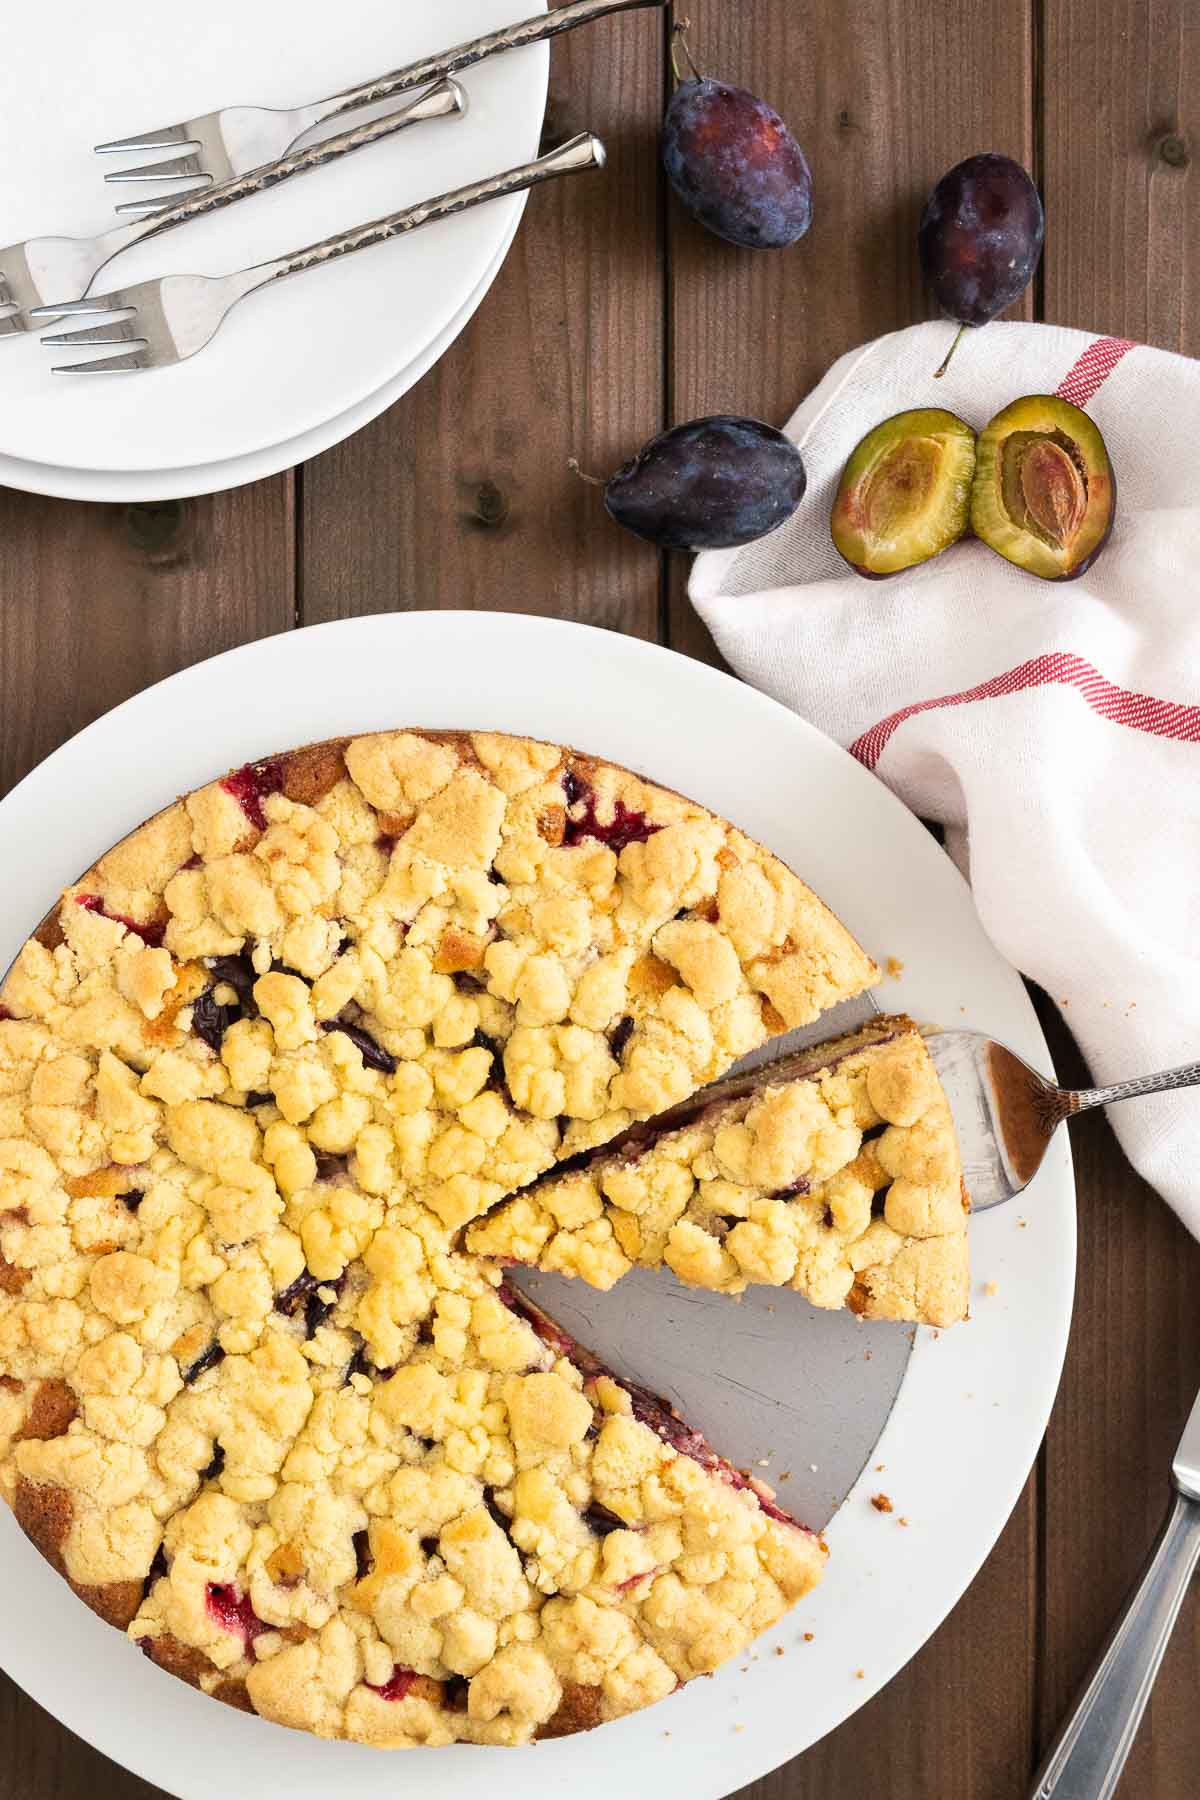 Top-down shot of a plum cake with streusel on a springform bottom on a white plate. A cake server is lifting out a slice. Next to the plate, there are plums, a knife, two white plates with forks and a white dishtowel with a red stripe.